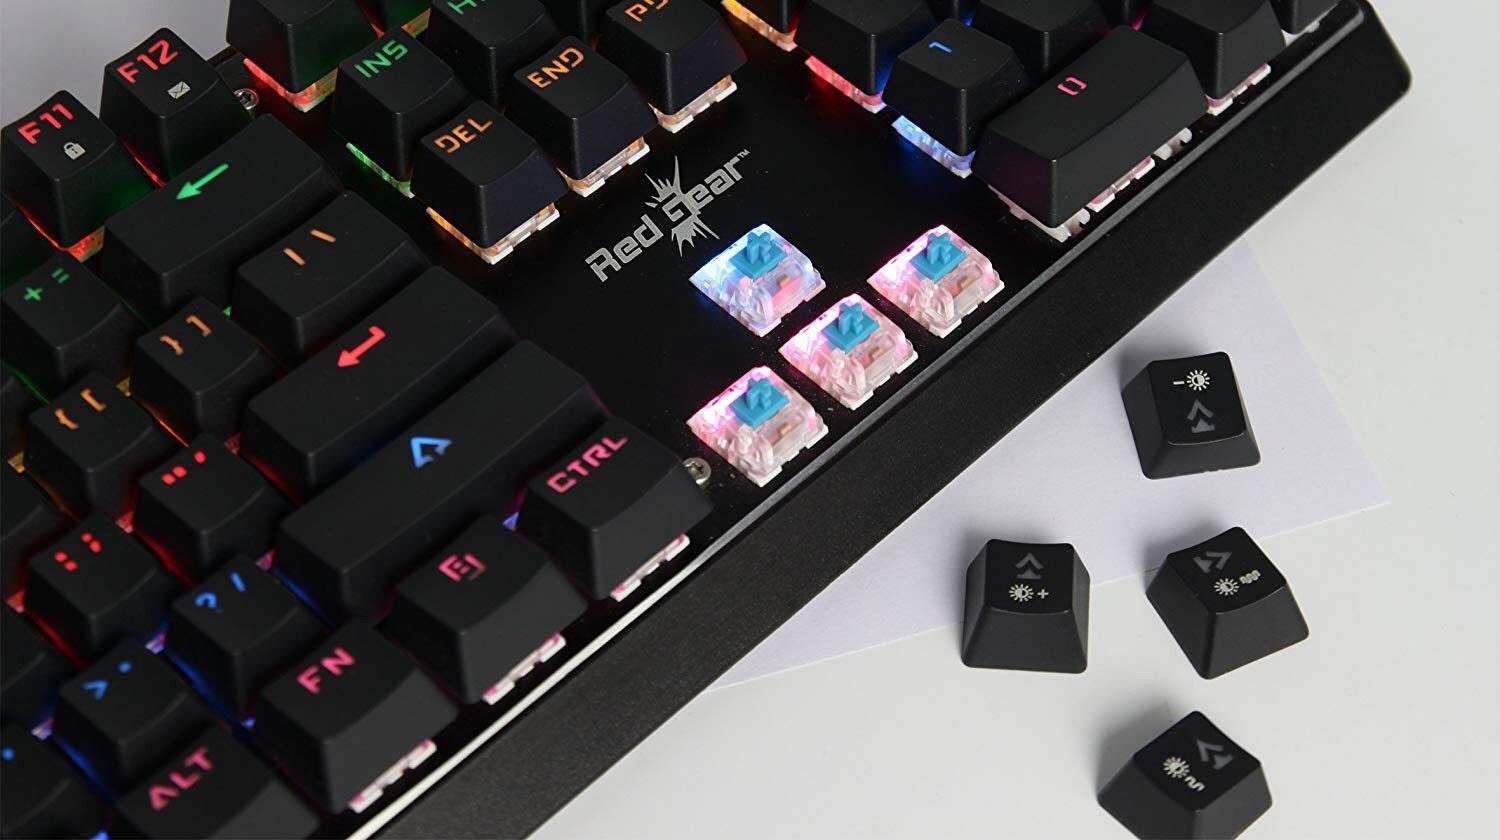 Best Gaming Keyboards Under 1000: 10 Best Gaming Keyboards Under 1000 in  India Starting at Rs. 439 - The Economic Times